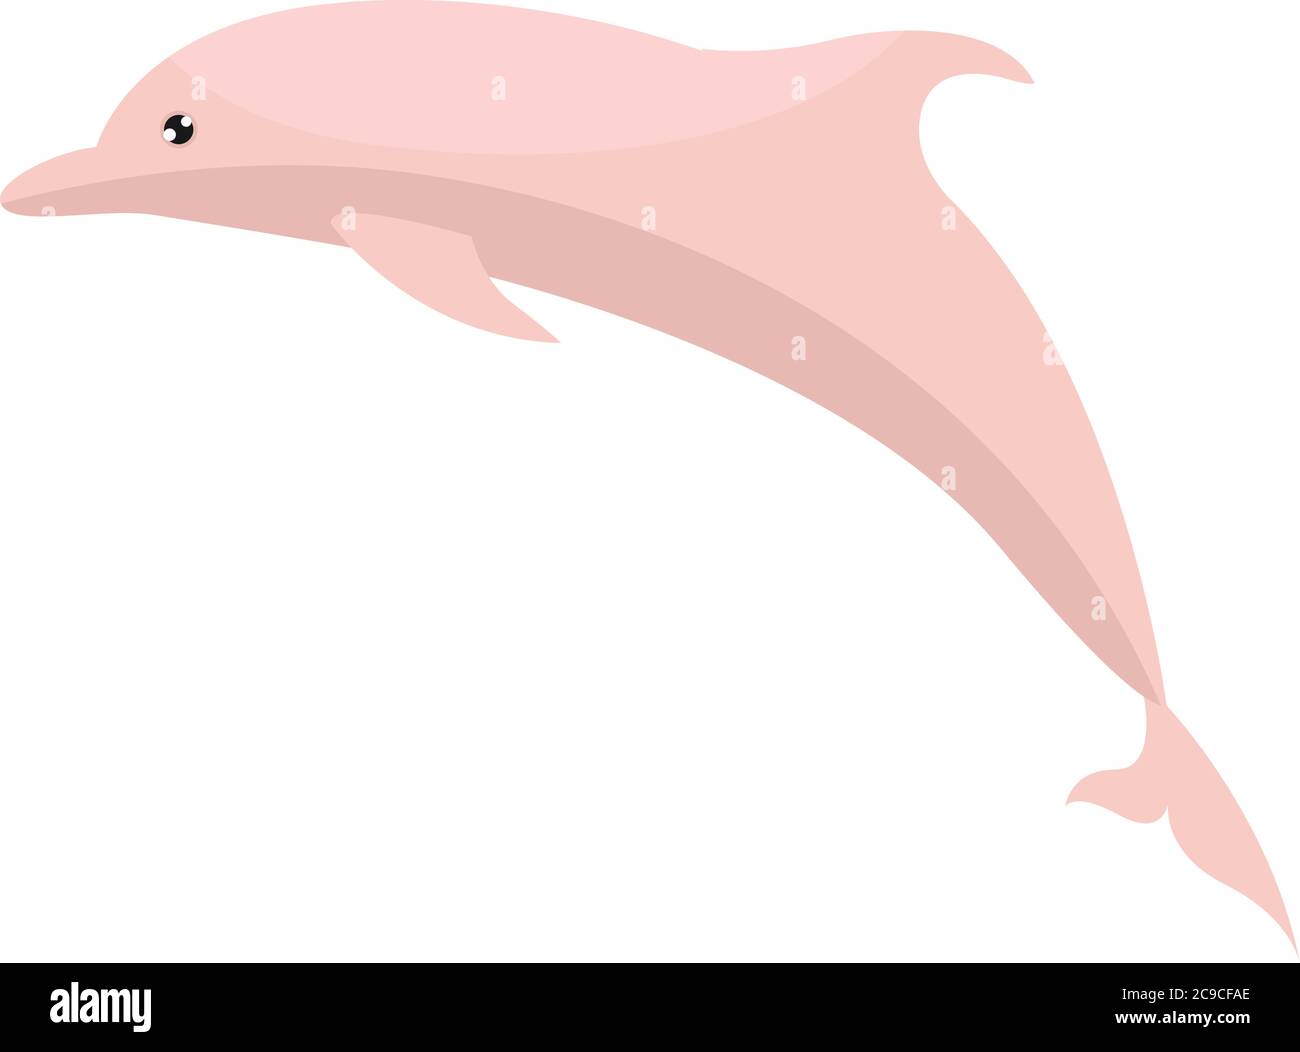 Pink dolphin, illustration, vector on white background Stock Vector